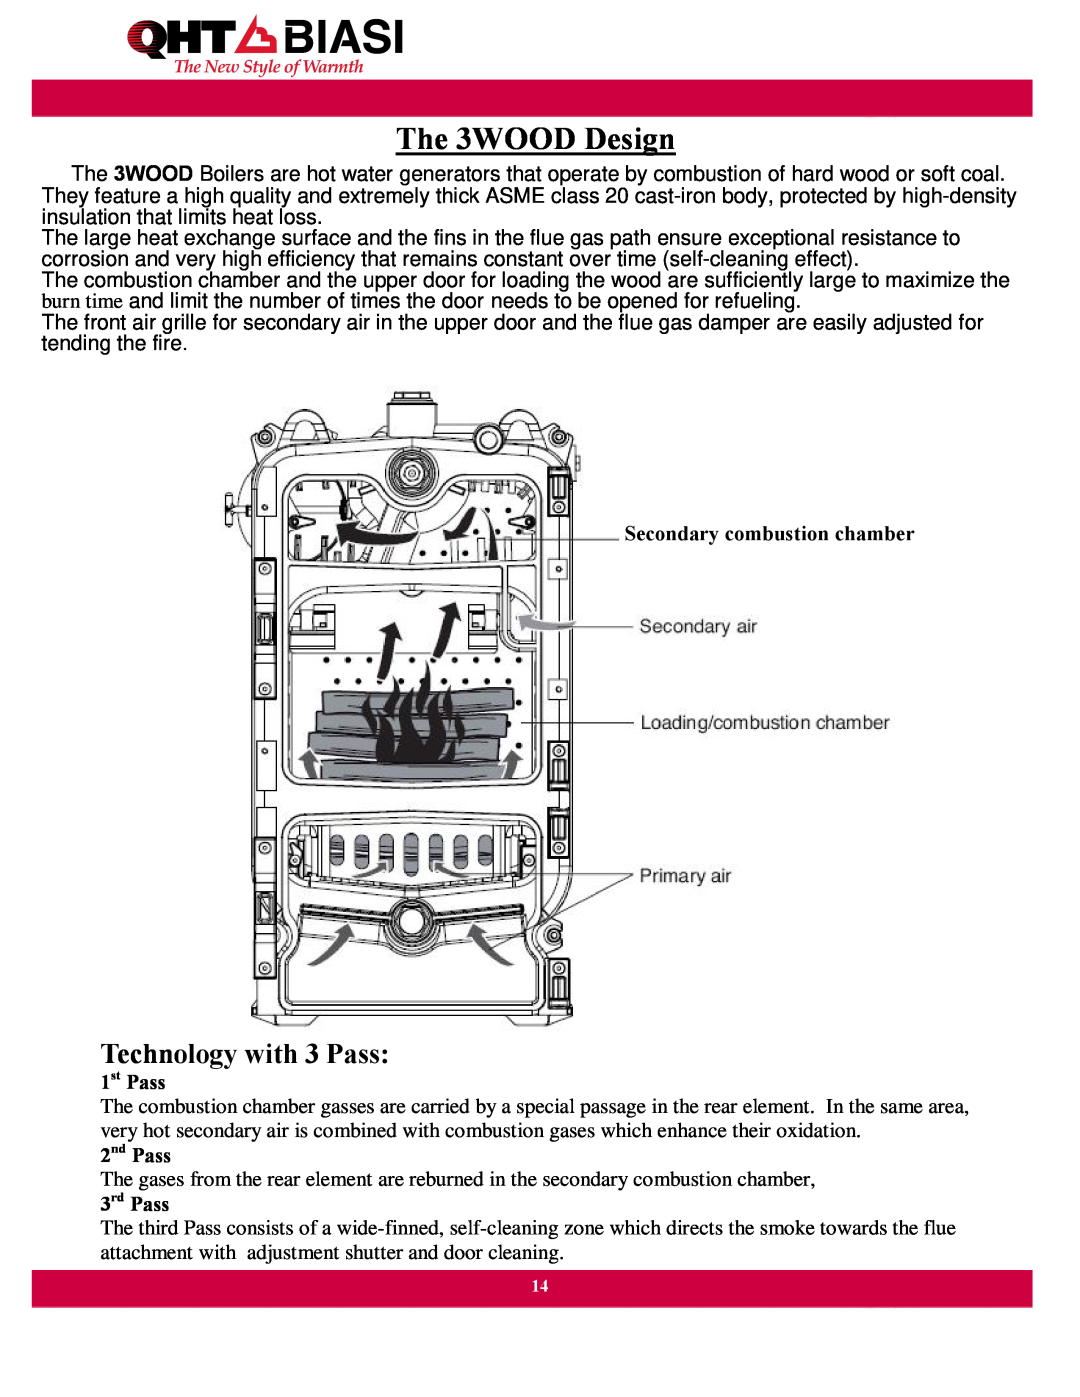 QHT Boiler manual The 3WOOD Design, Technology with 3 Pass 